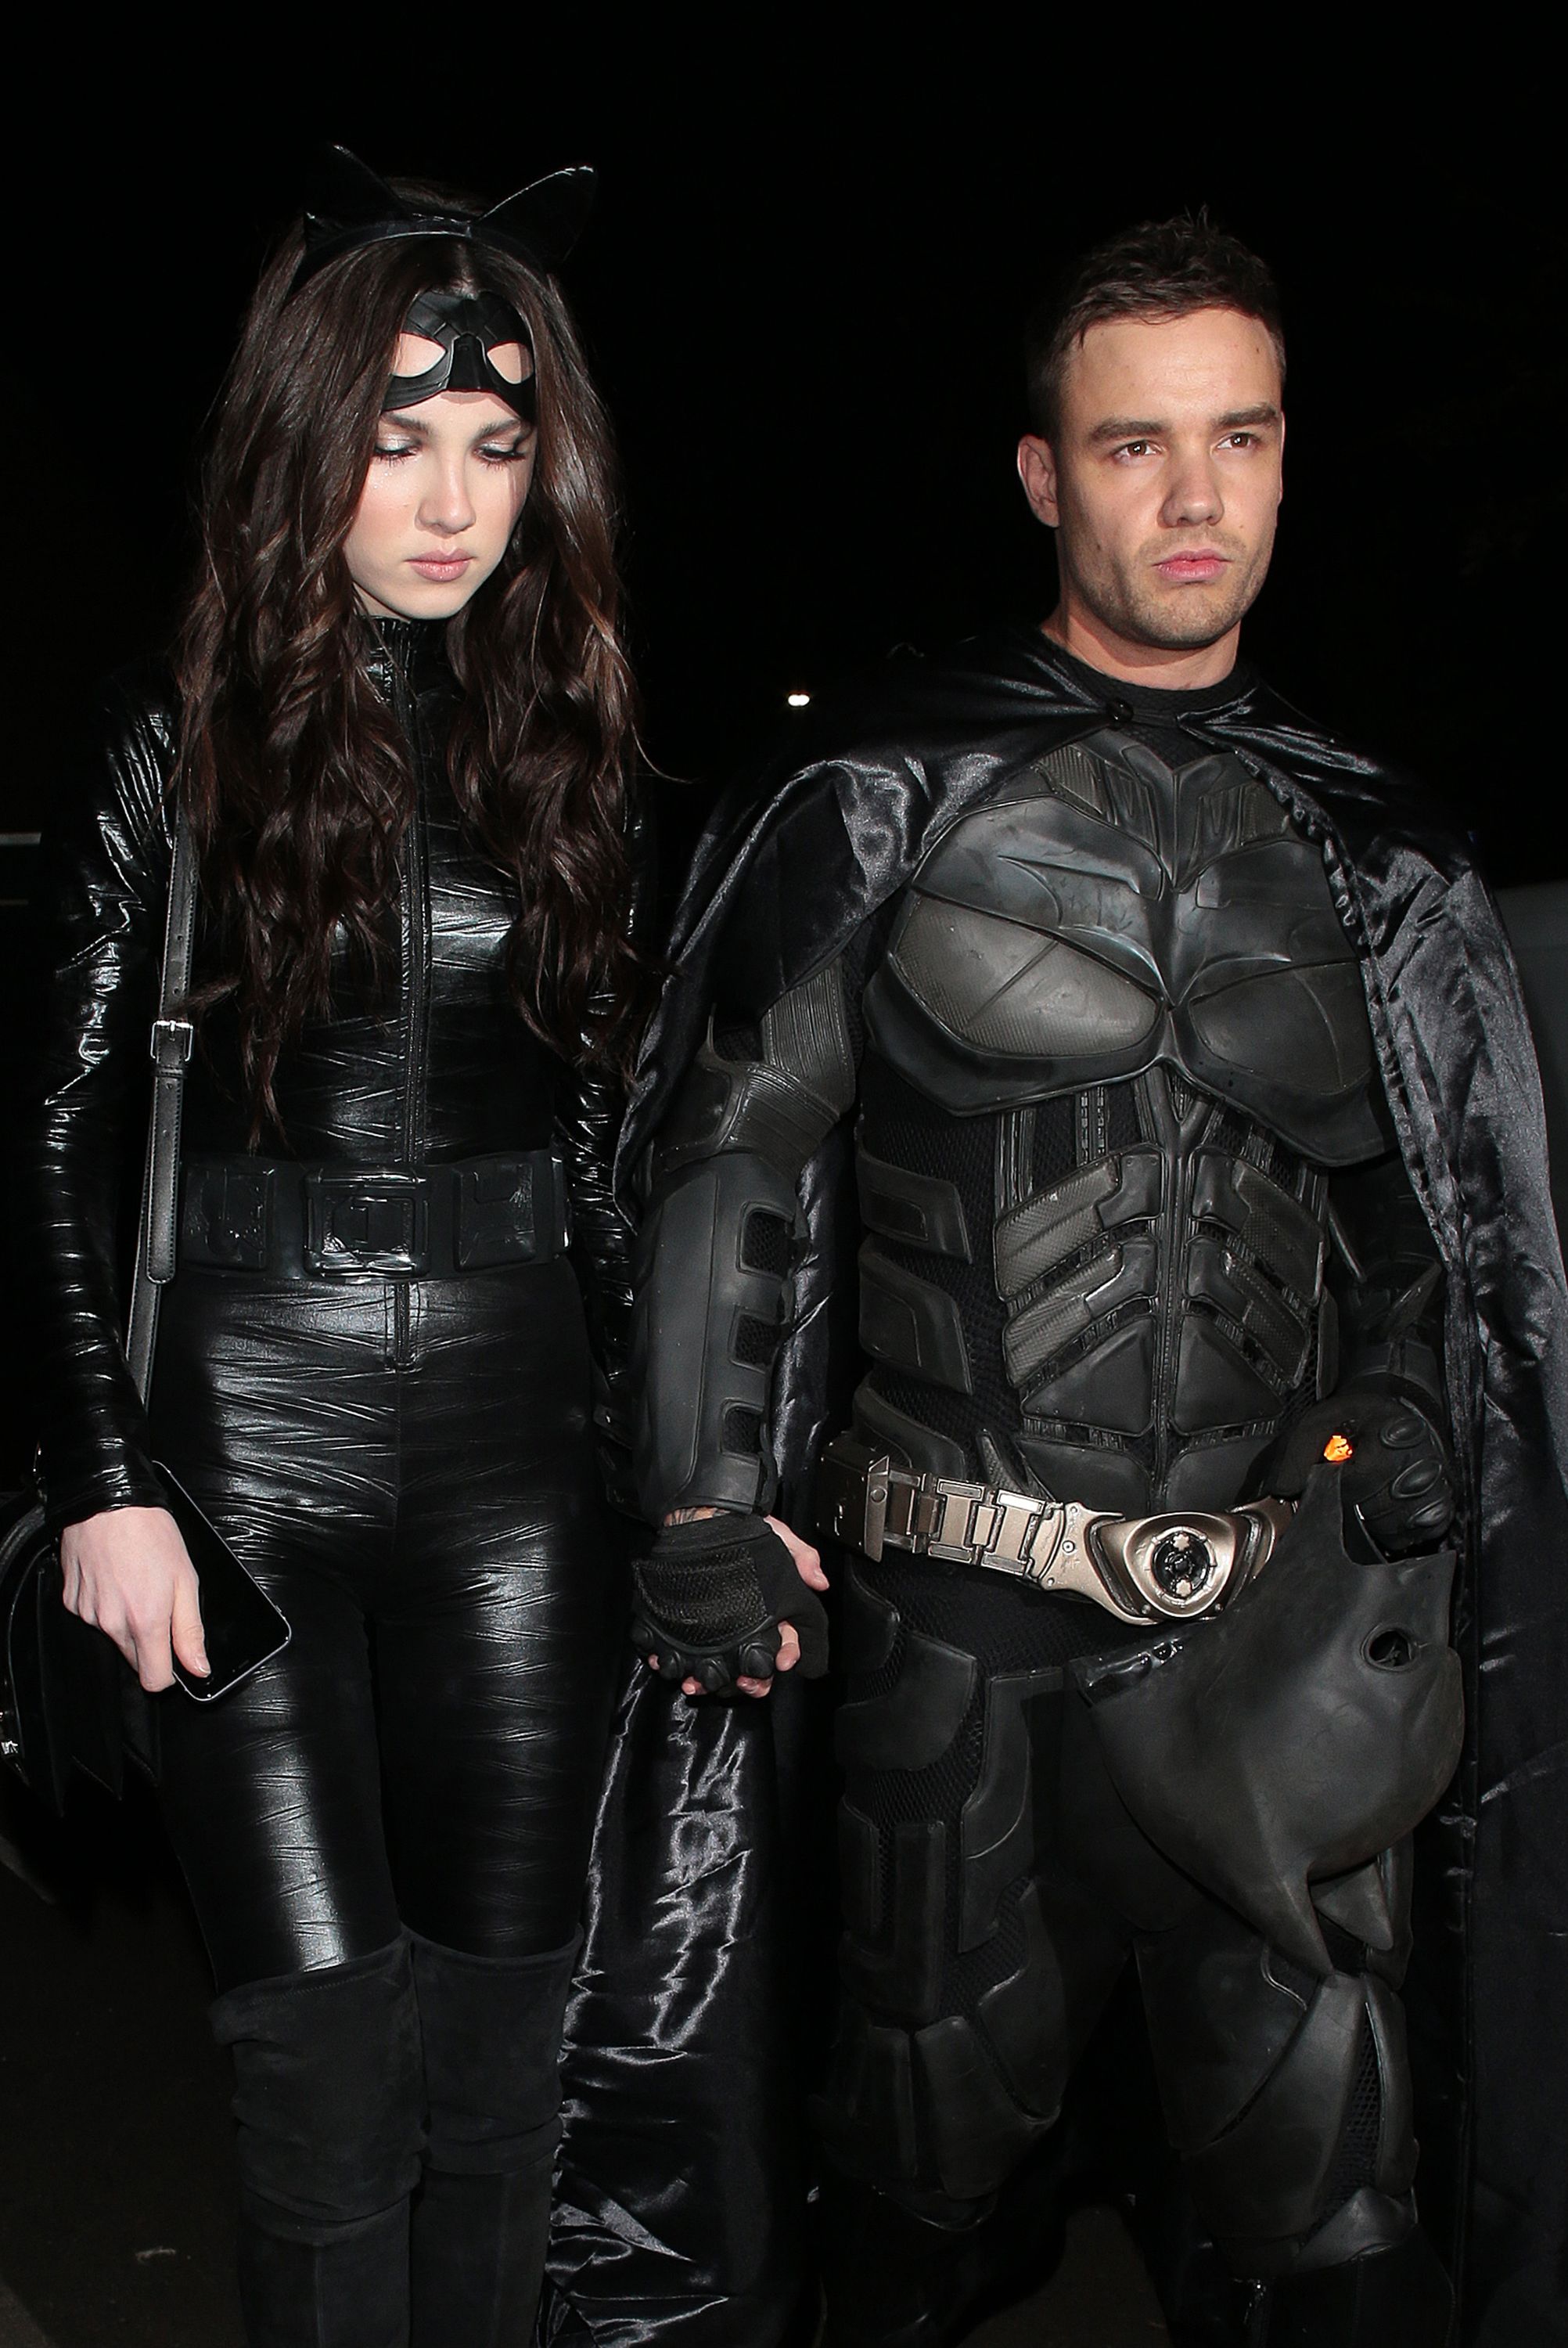 catwoman and batman couple costumes